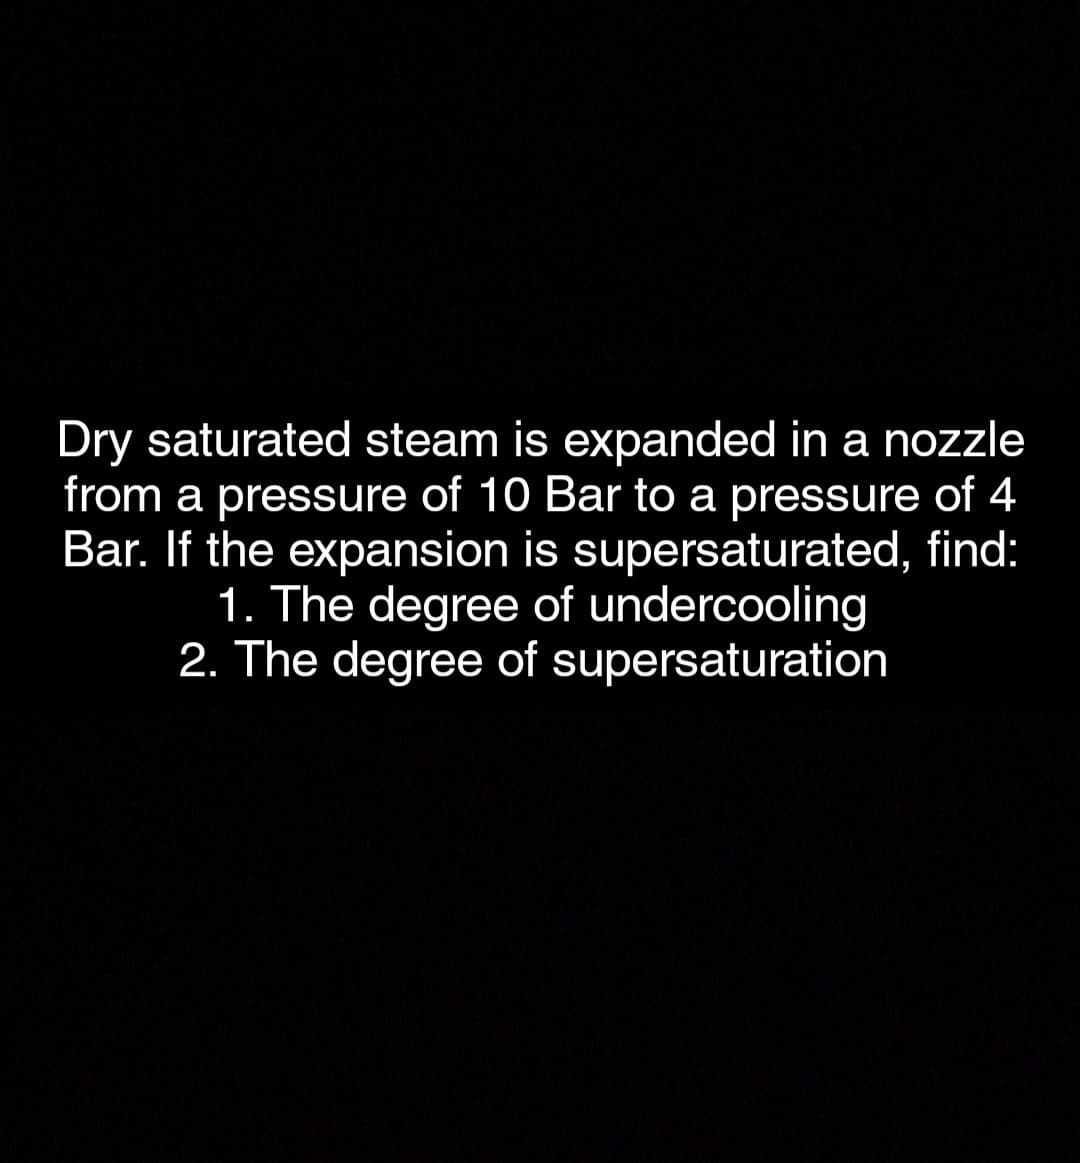 Dry saturated steam is expanded in a nozzle
from a pressure of 10 Bar to a pressure of 4
Bar. If the expansion is supersaturated, find:
1. The degree of undercooling
2. The degree of supersaturation
